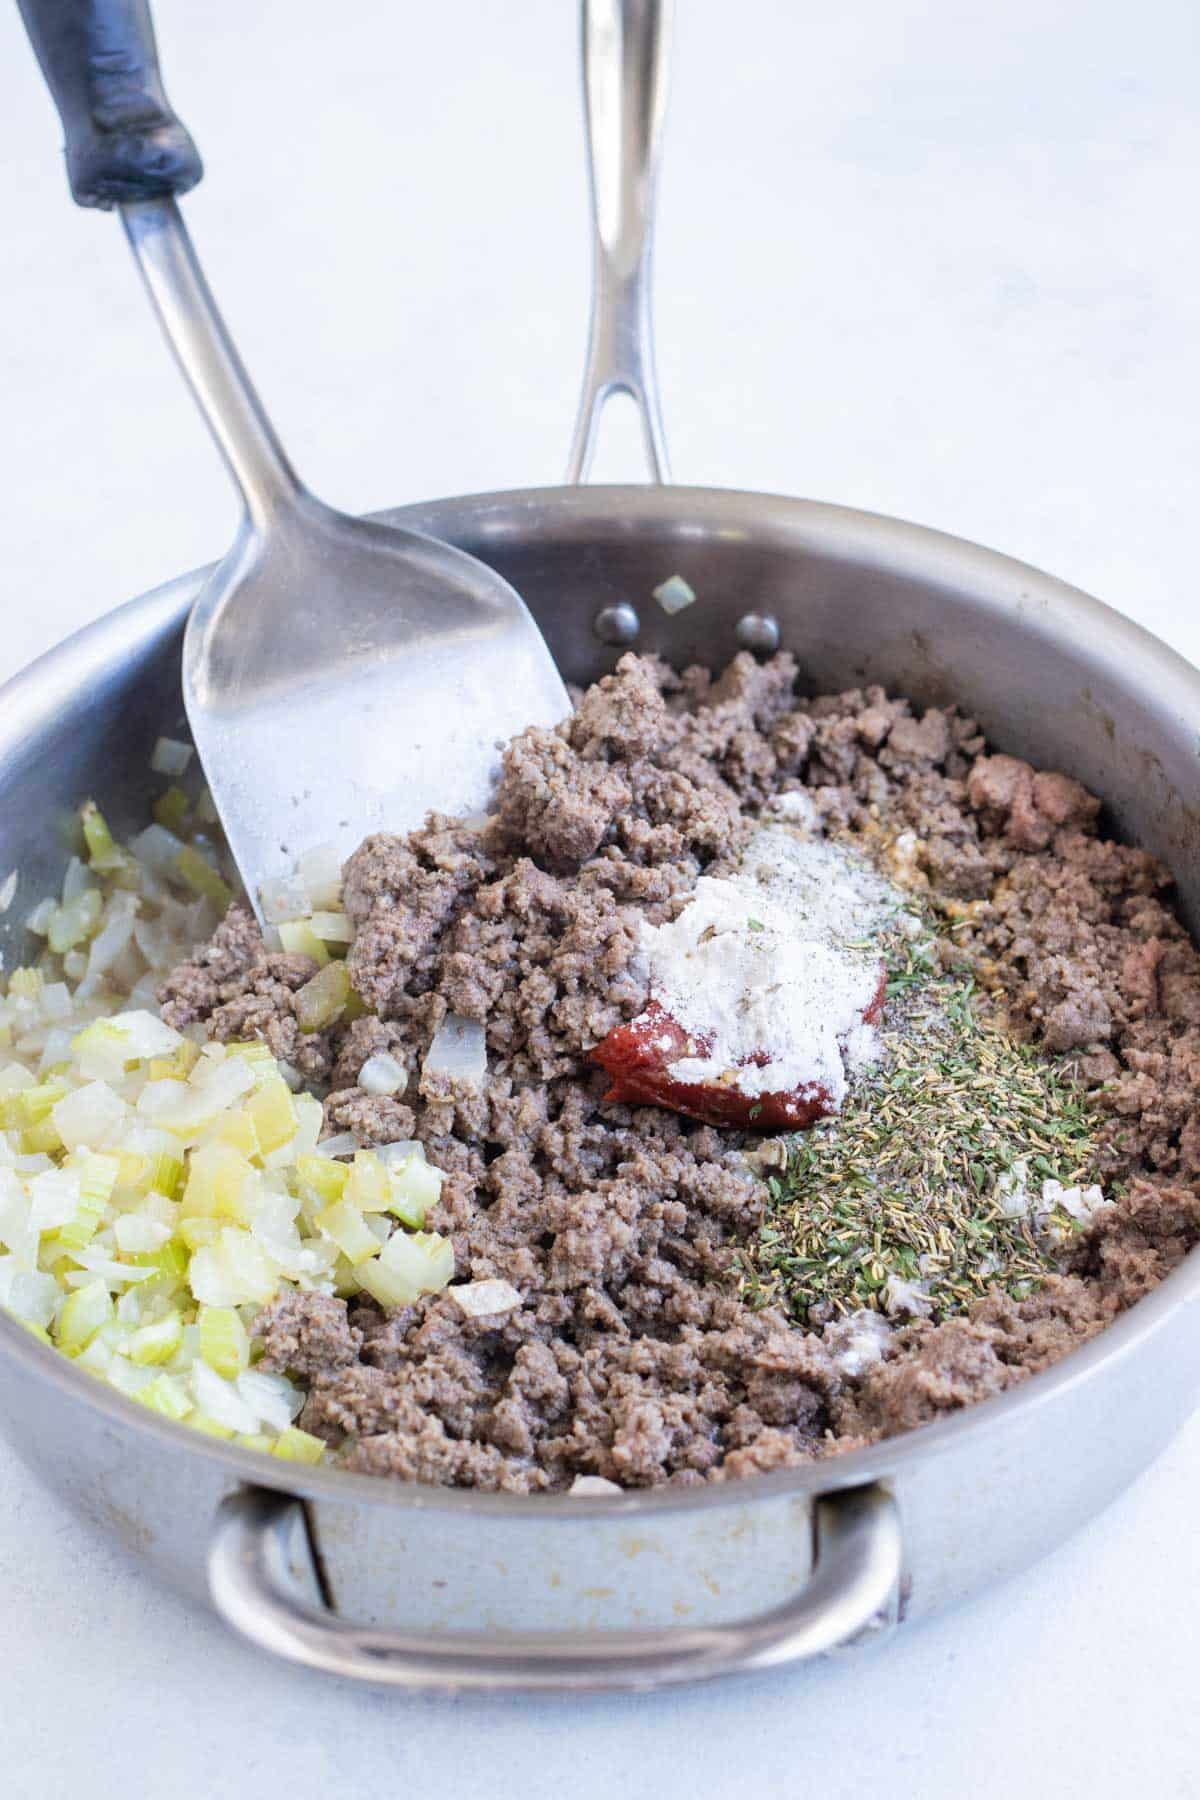 Seasoning is added to ground beef.